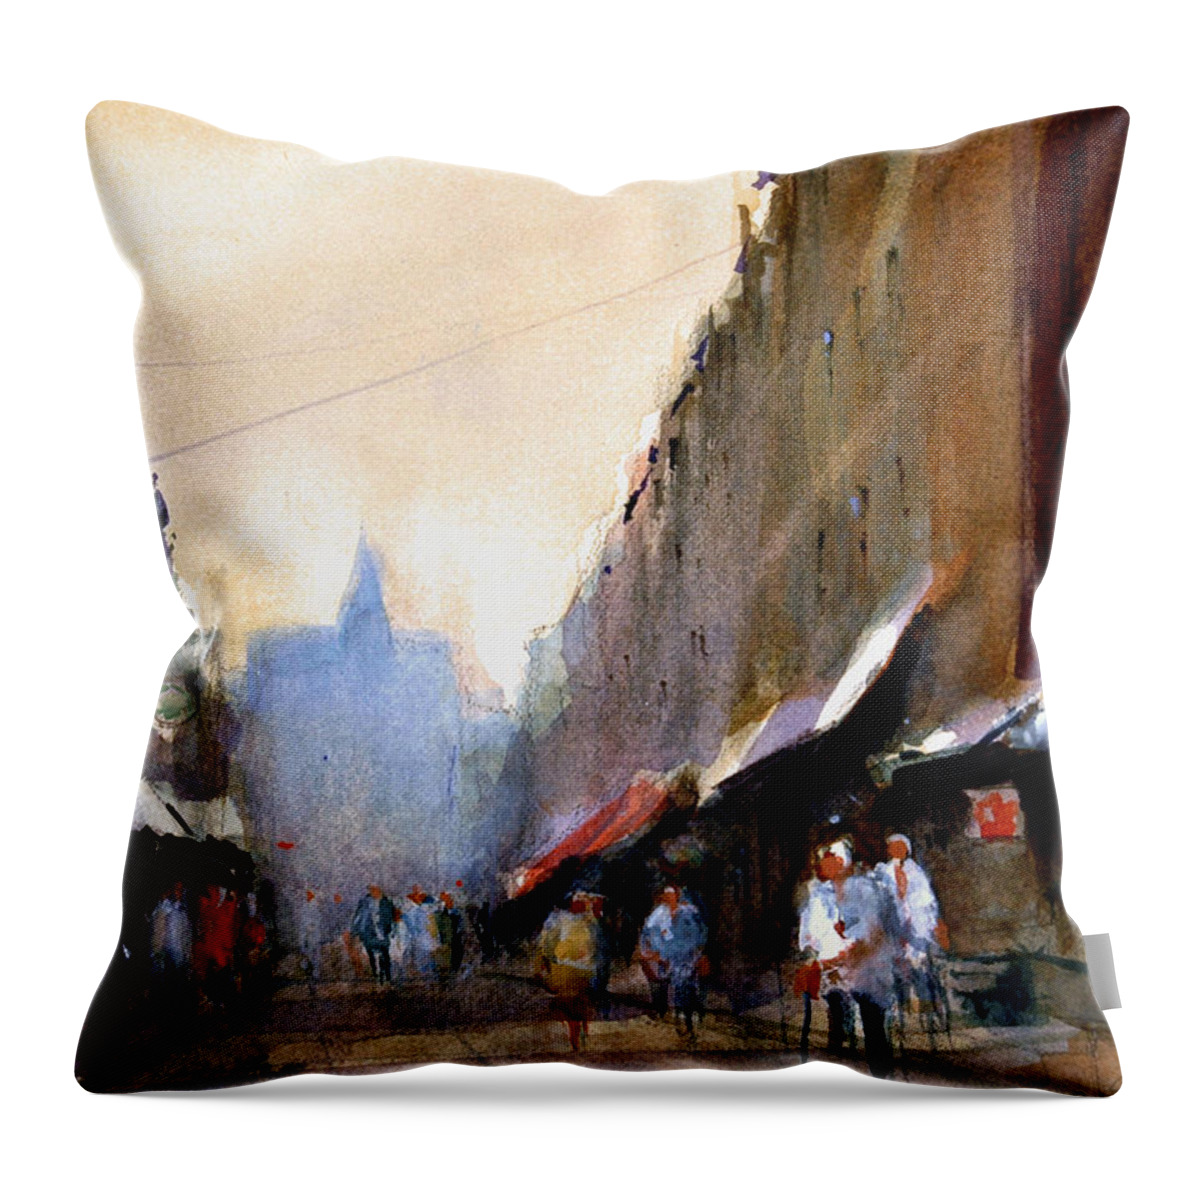 Cityscape Throw Pillow featuring the painting Eastside by Charles Rowland